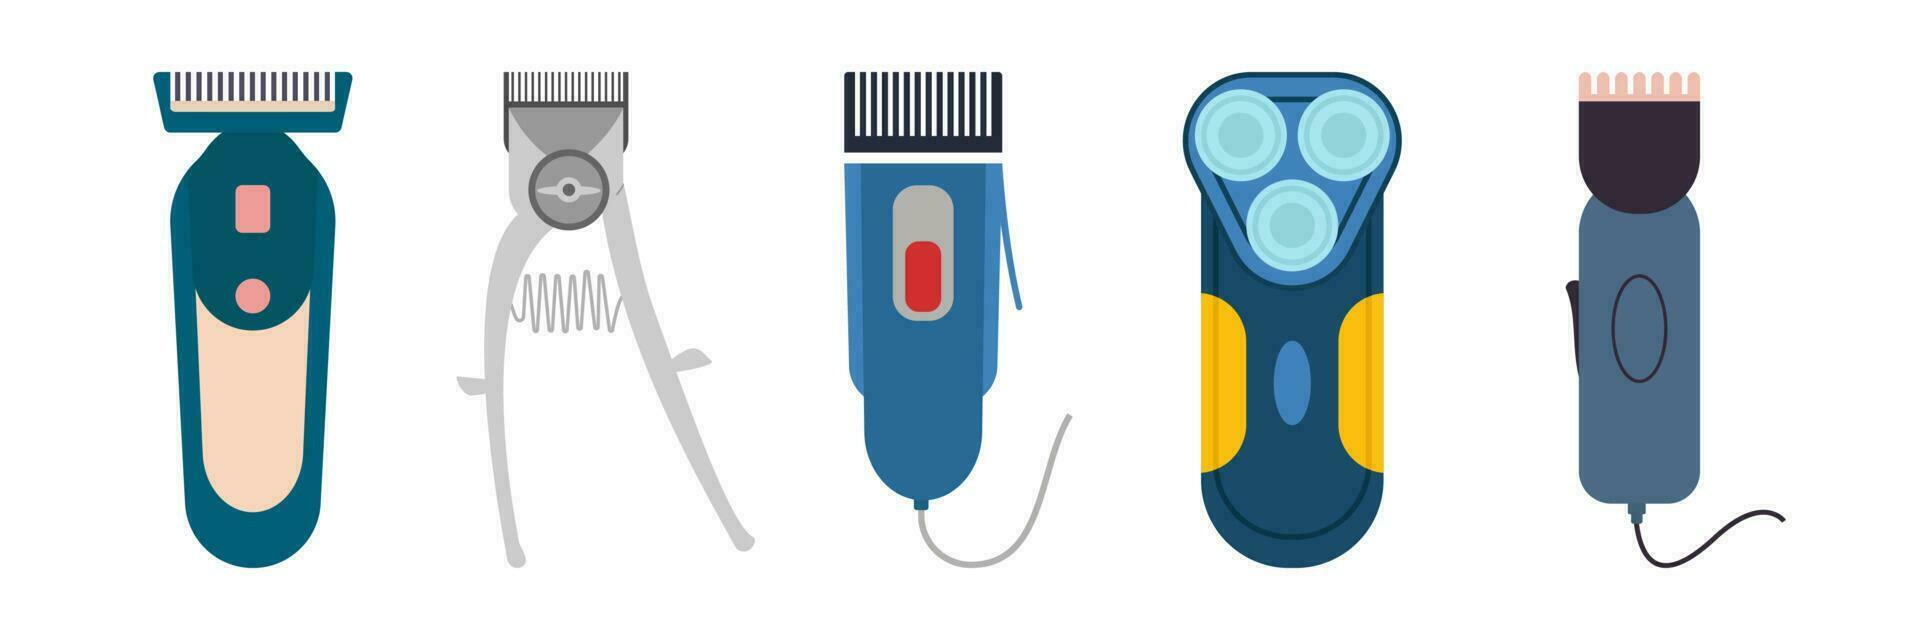 Illustration of hair clipper. Electric shaver and old hair clipper vector icon set.